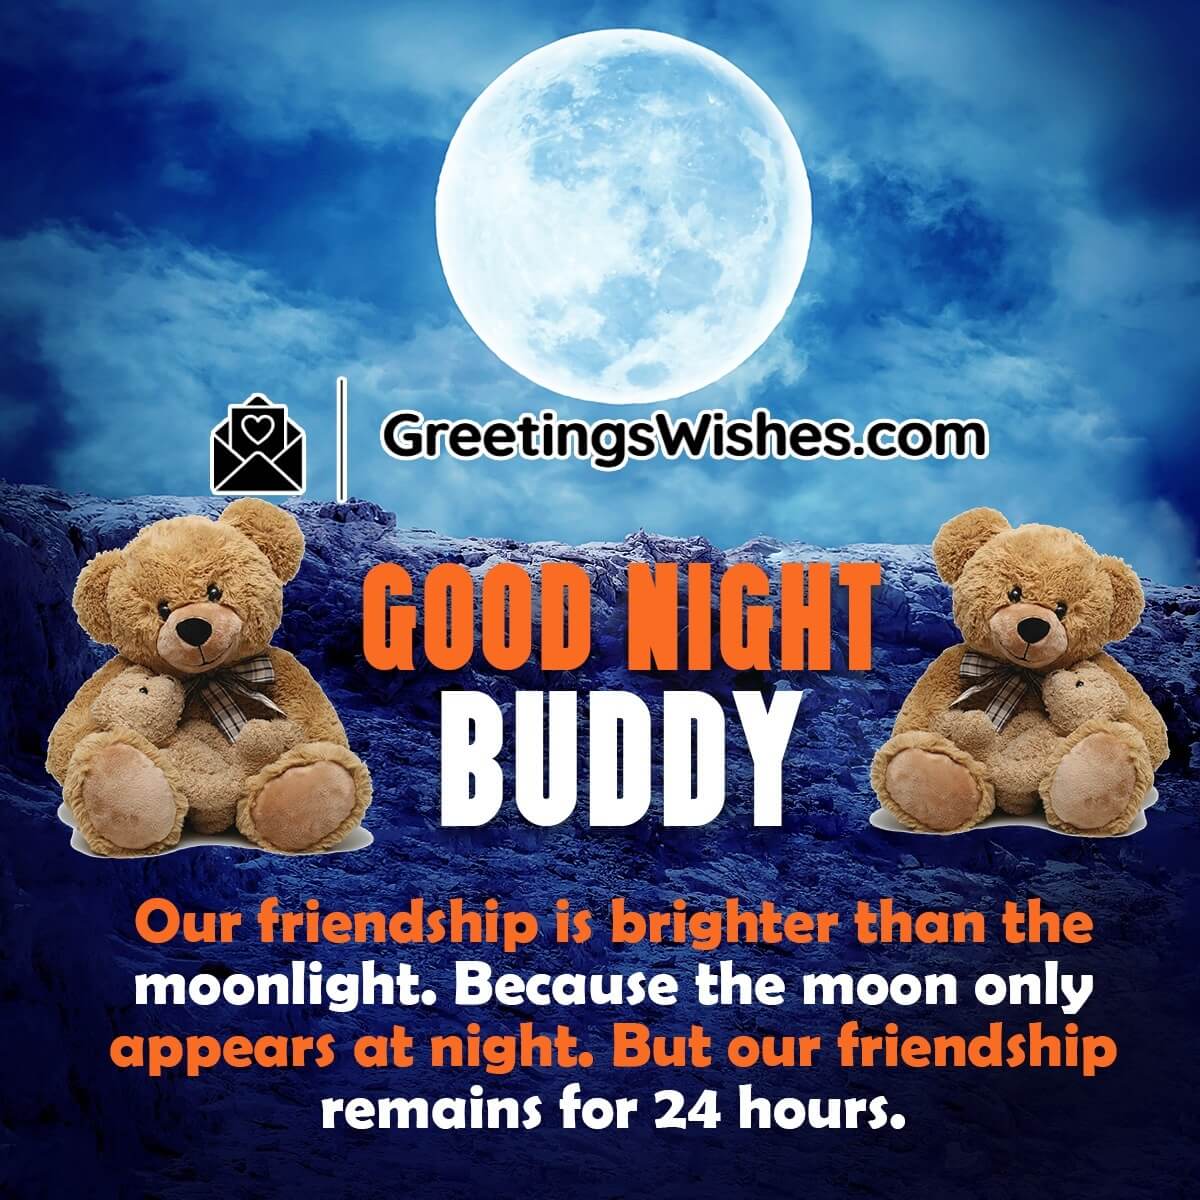 Good Night Messages For Friends